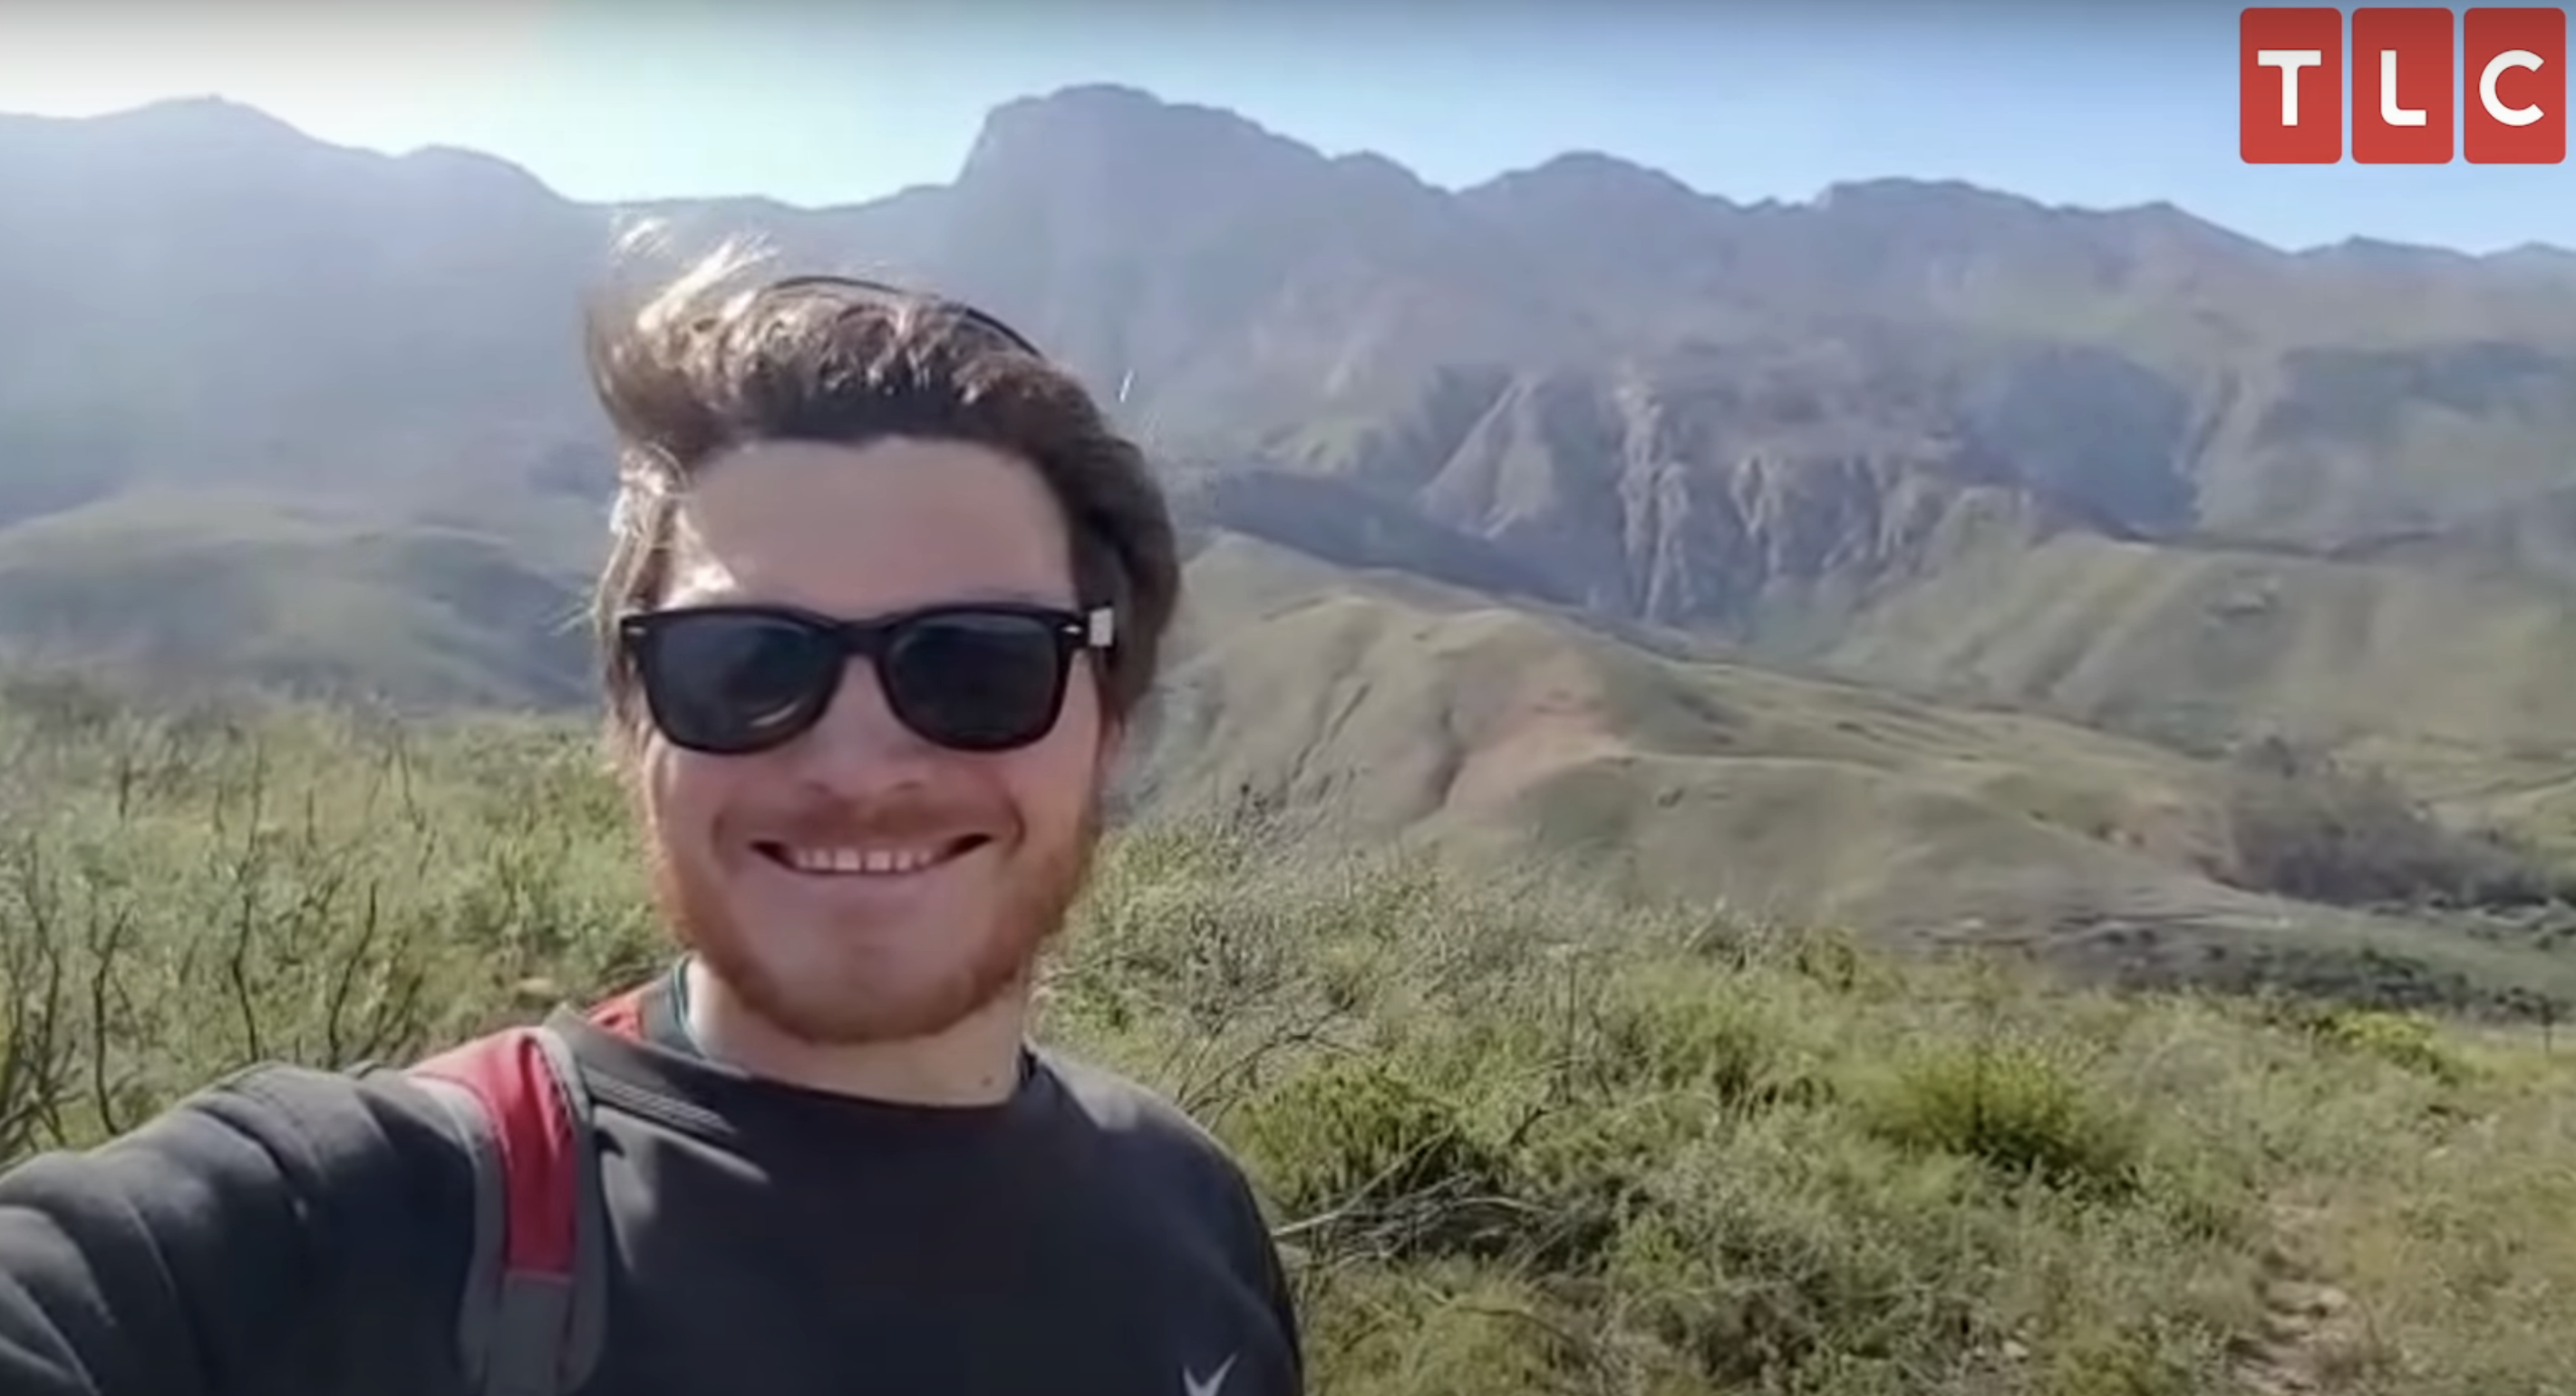 A man taking a selfie in South Africa